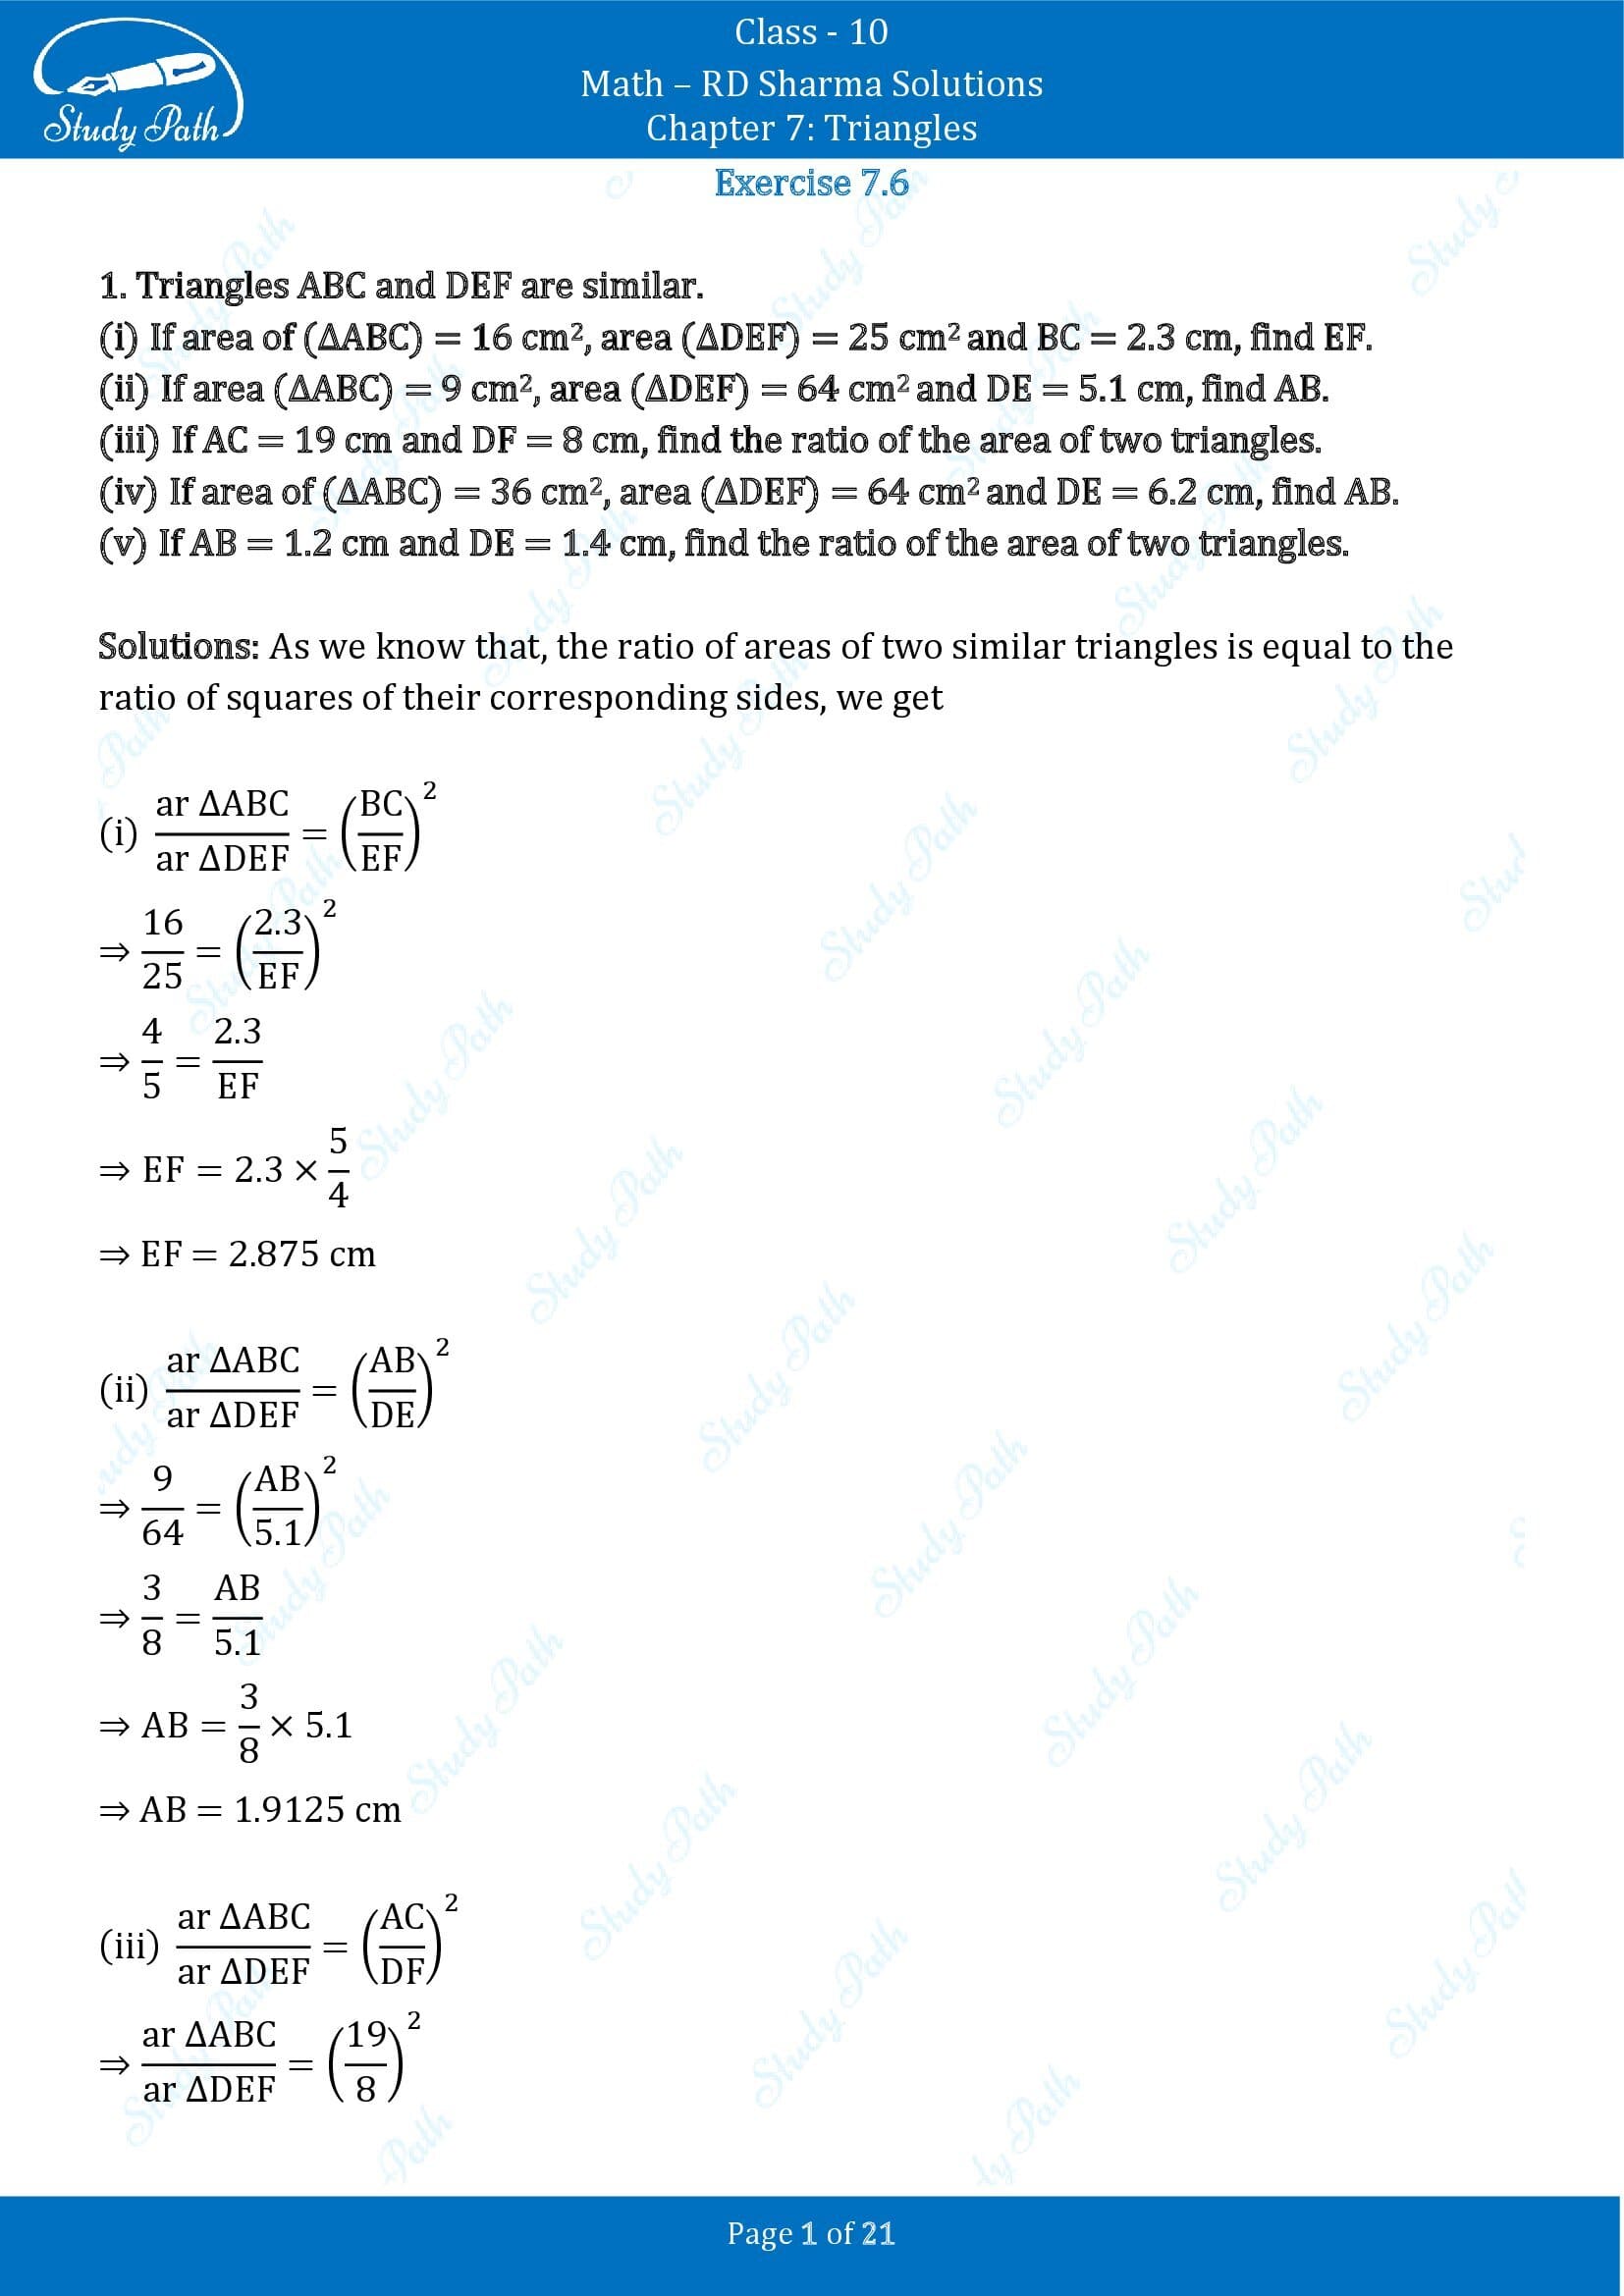 RD Sharma Solutions Class 10 Chapter 7 Triangles Exercise 7.6 00001